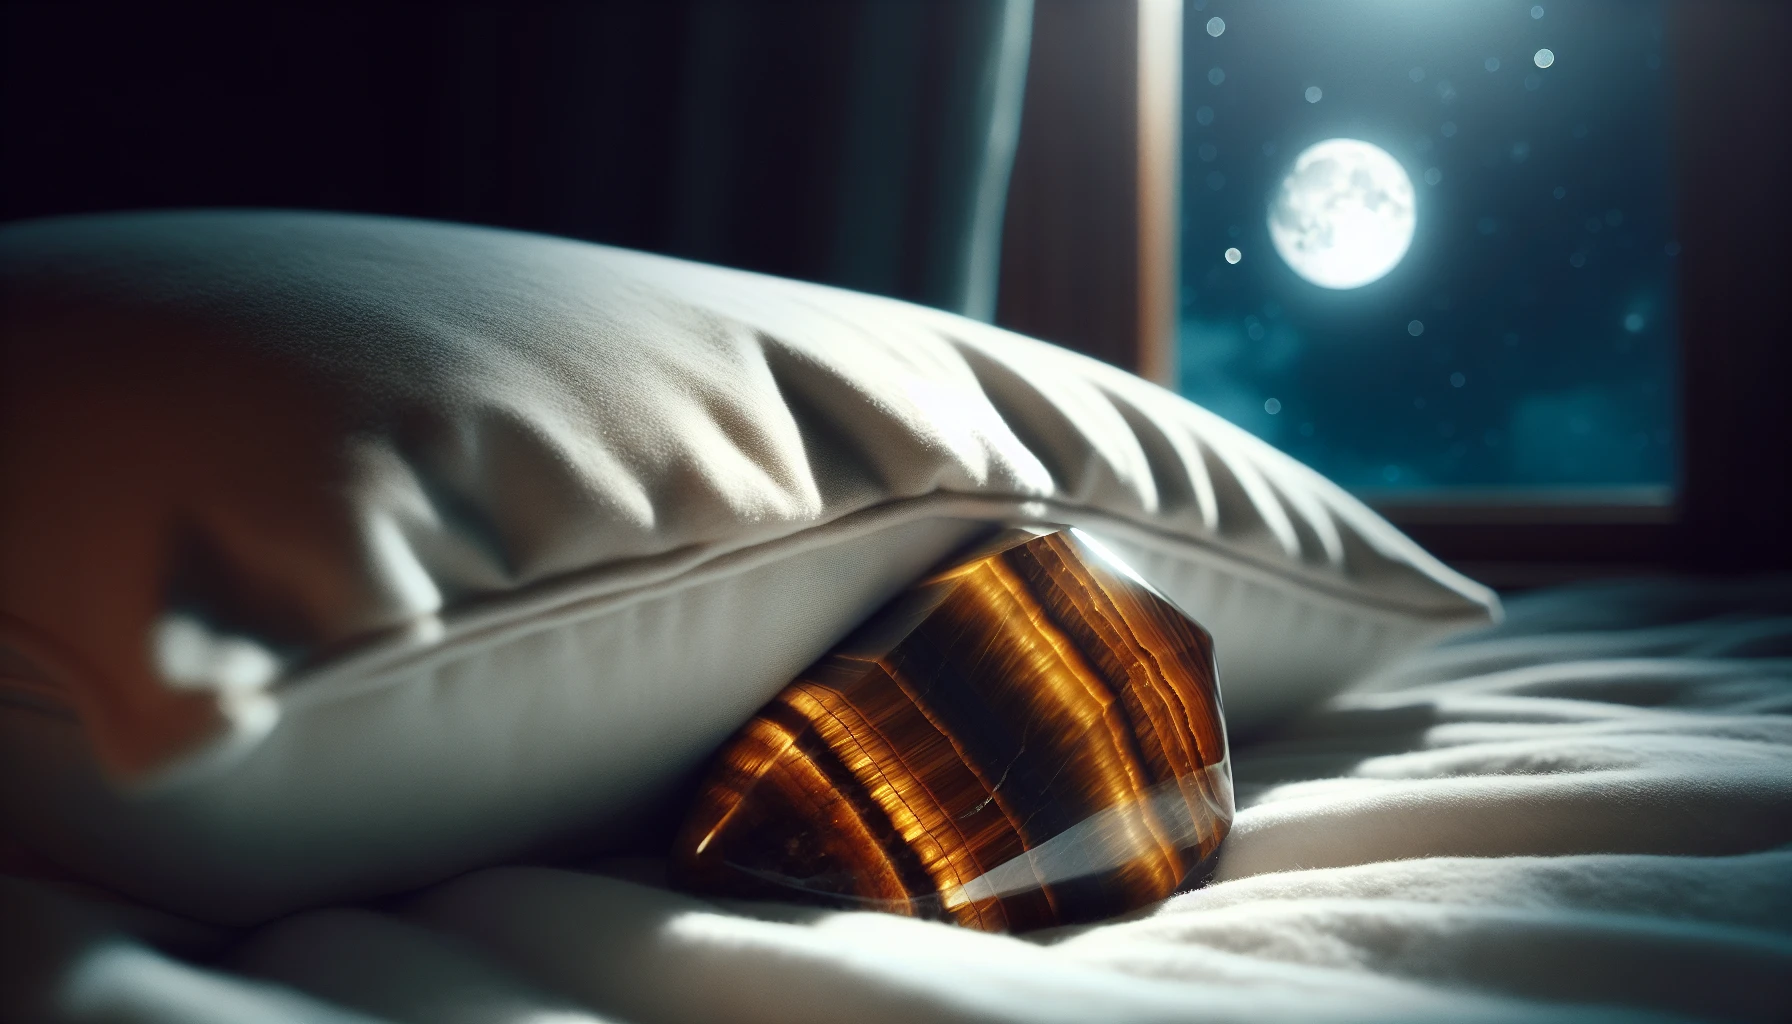 Sleeping with Tiger's Eye Under Pillow: Benefits & Precautions